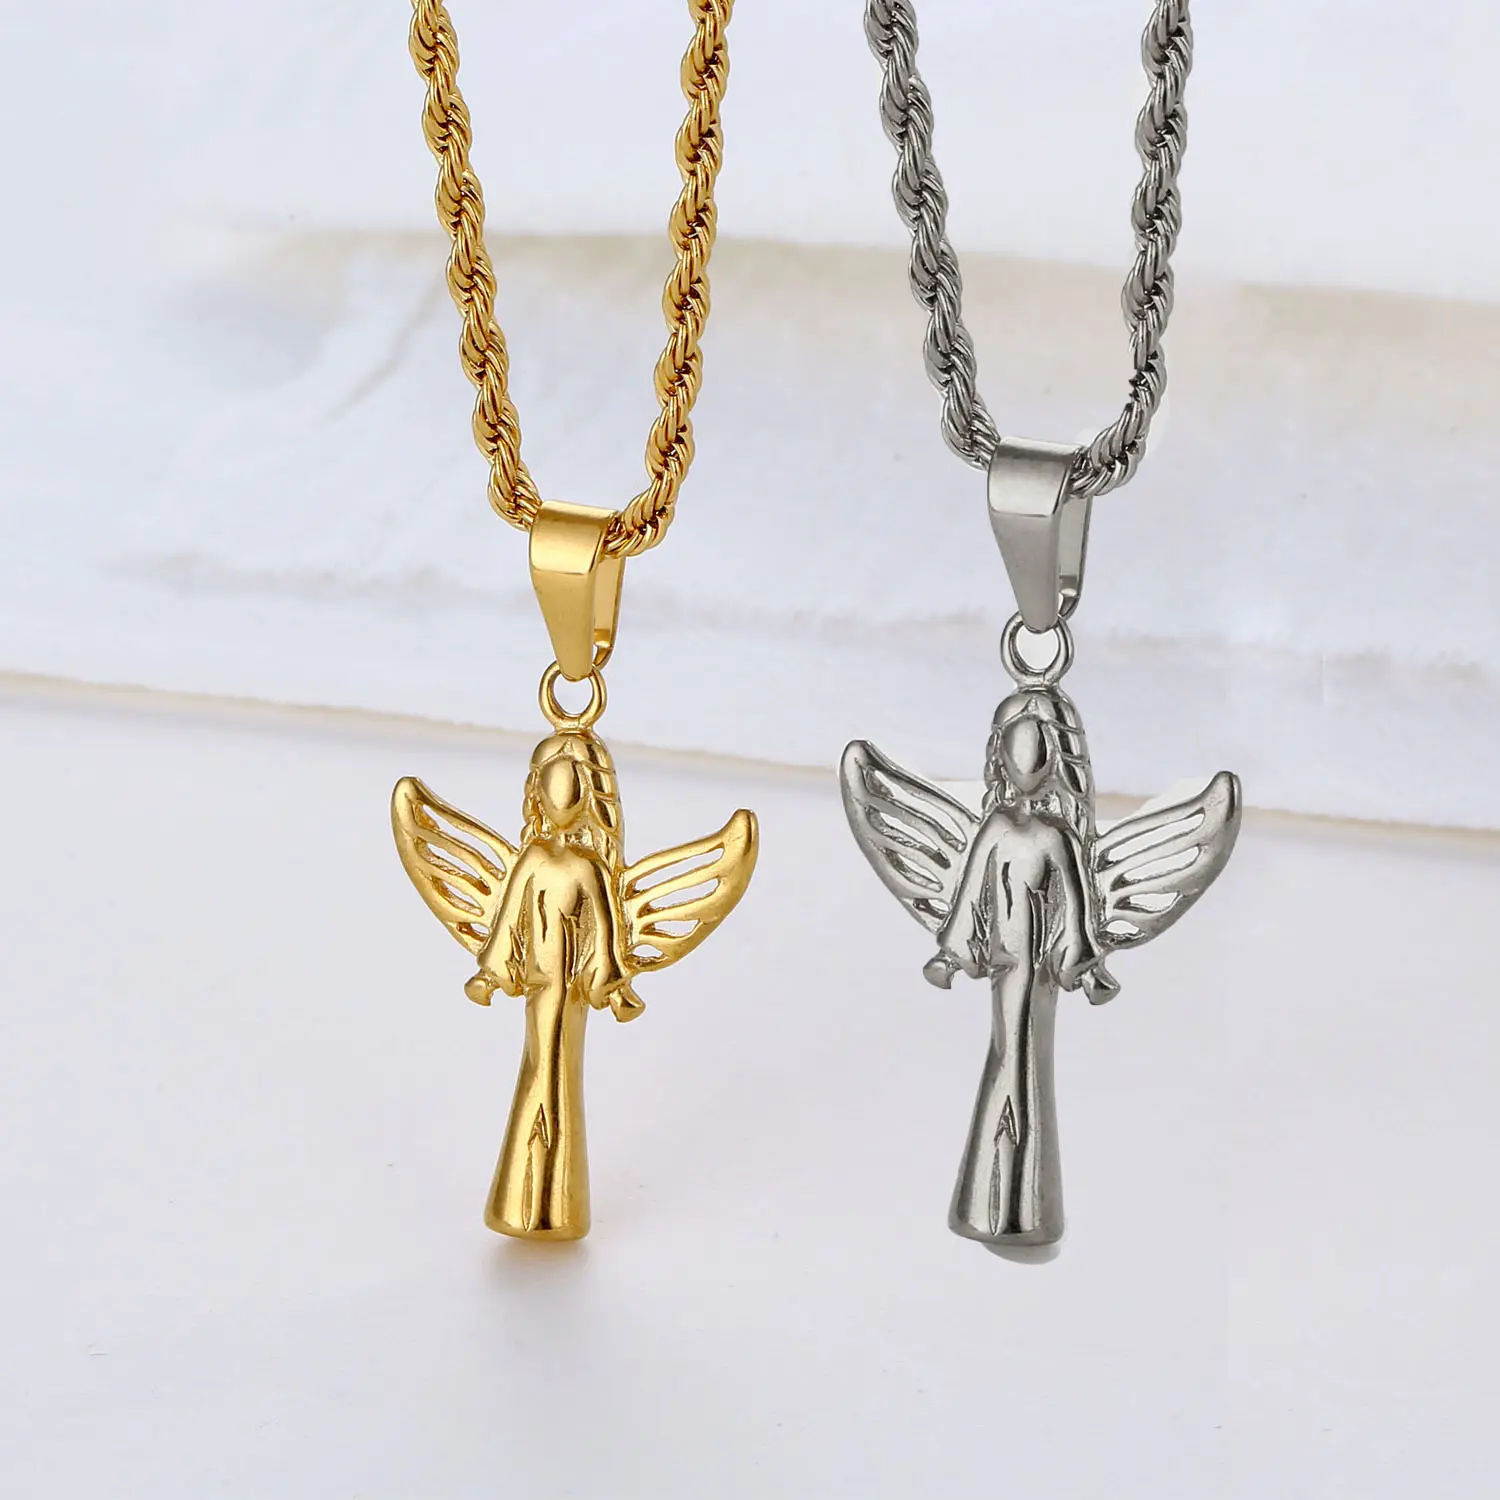 Fashion Stainless Steel Angel Necklace 18K Gold Plated Guardian Angel Wing Pendant Necklace for Women Girl Gift